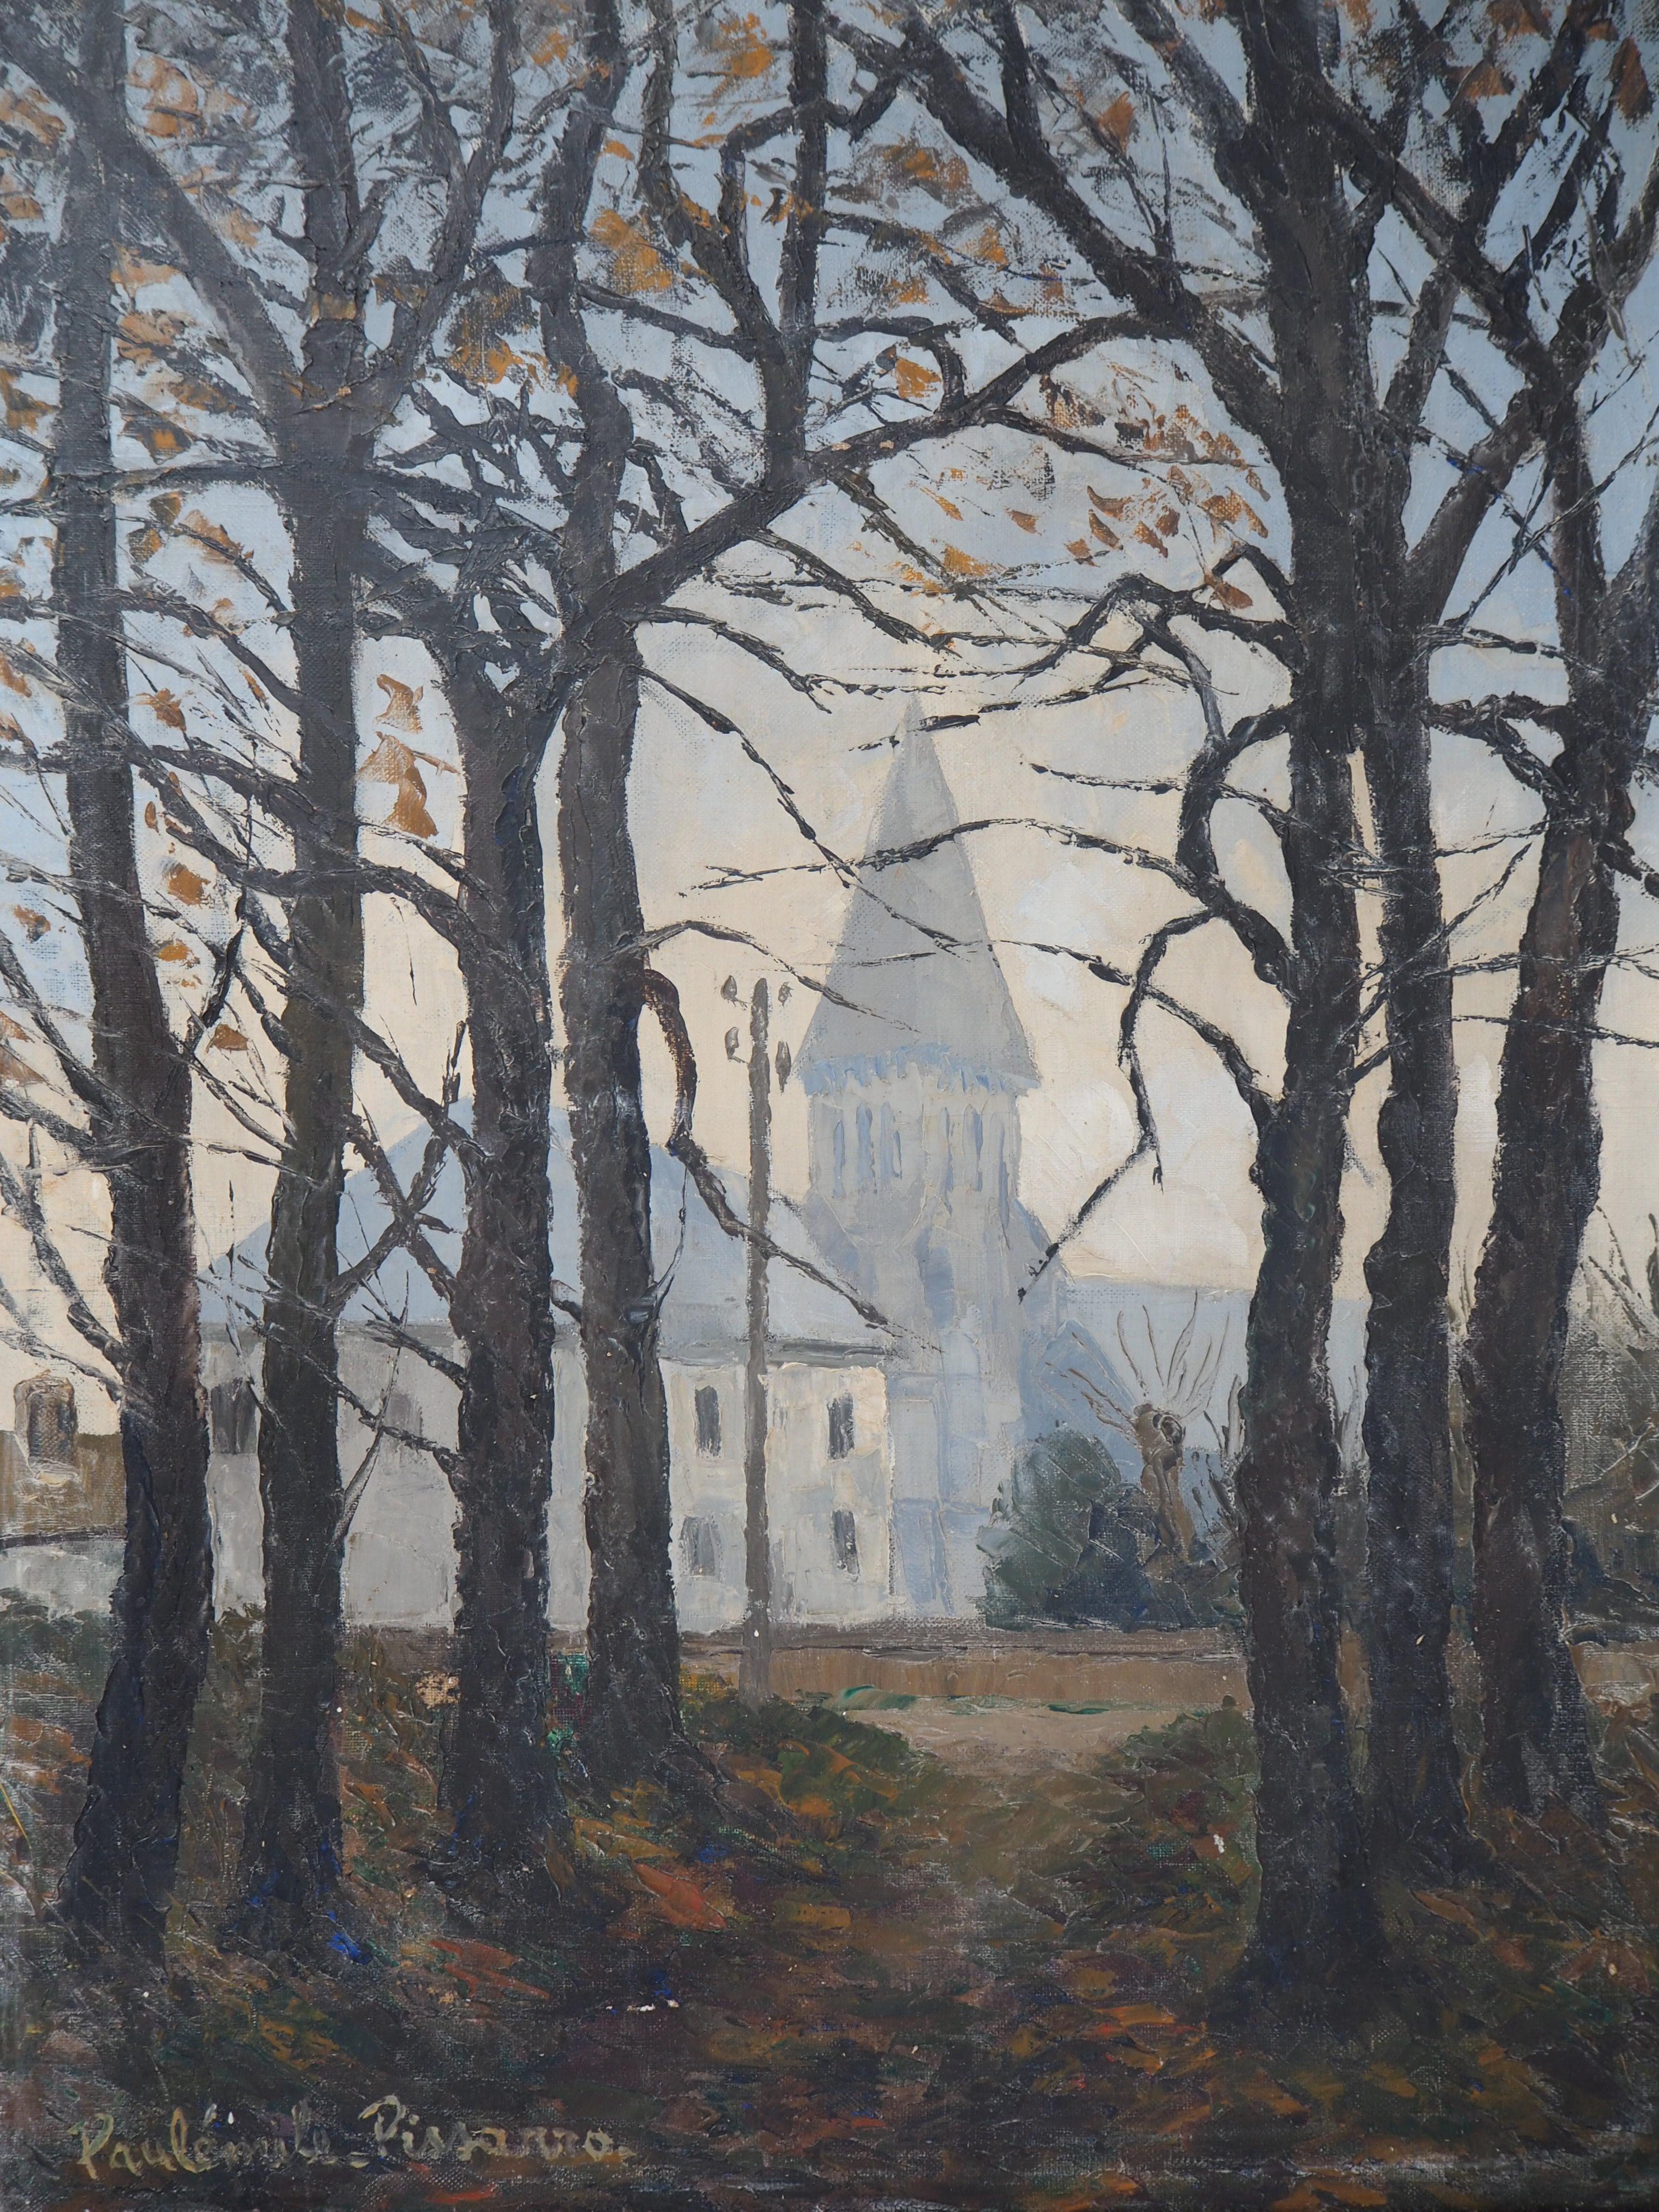 Normandy : Church of St Denis - Original oil on canvas, Handsigned - Impressionist Painting by Paul Emile Pissarro